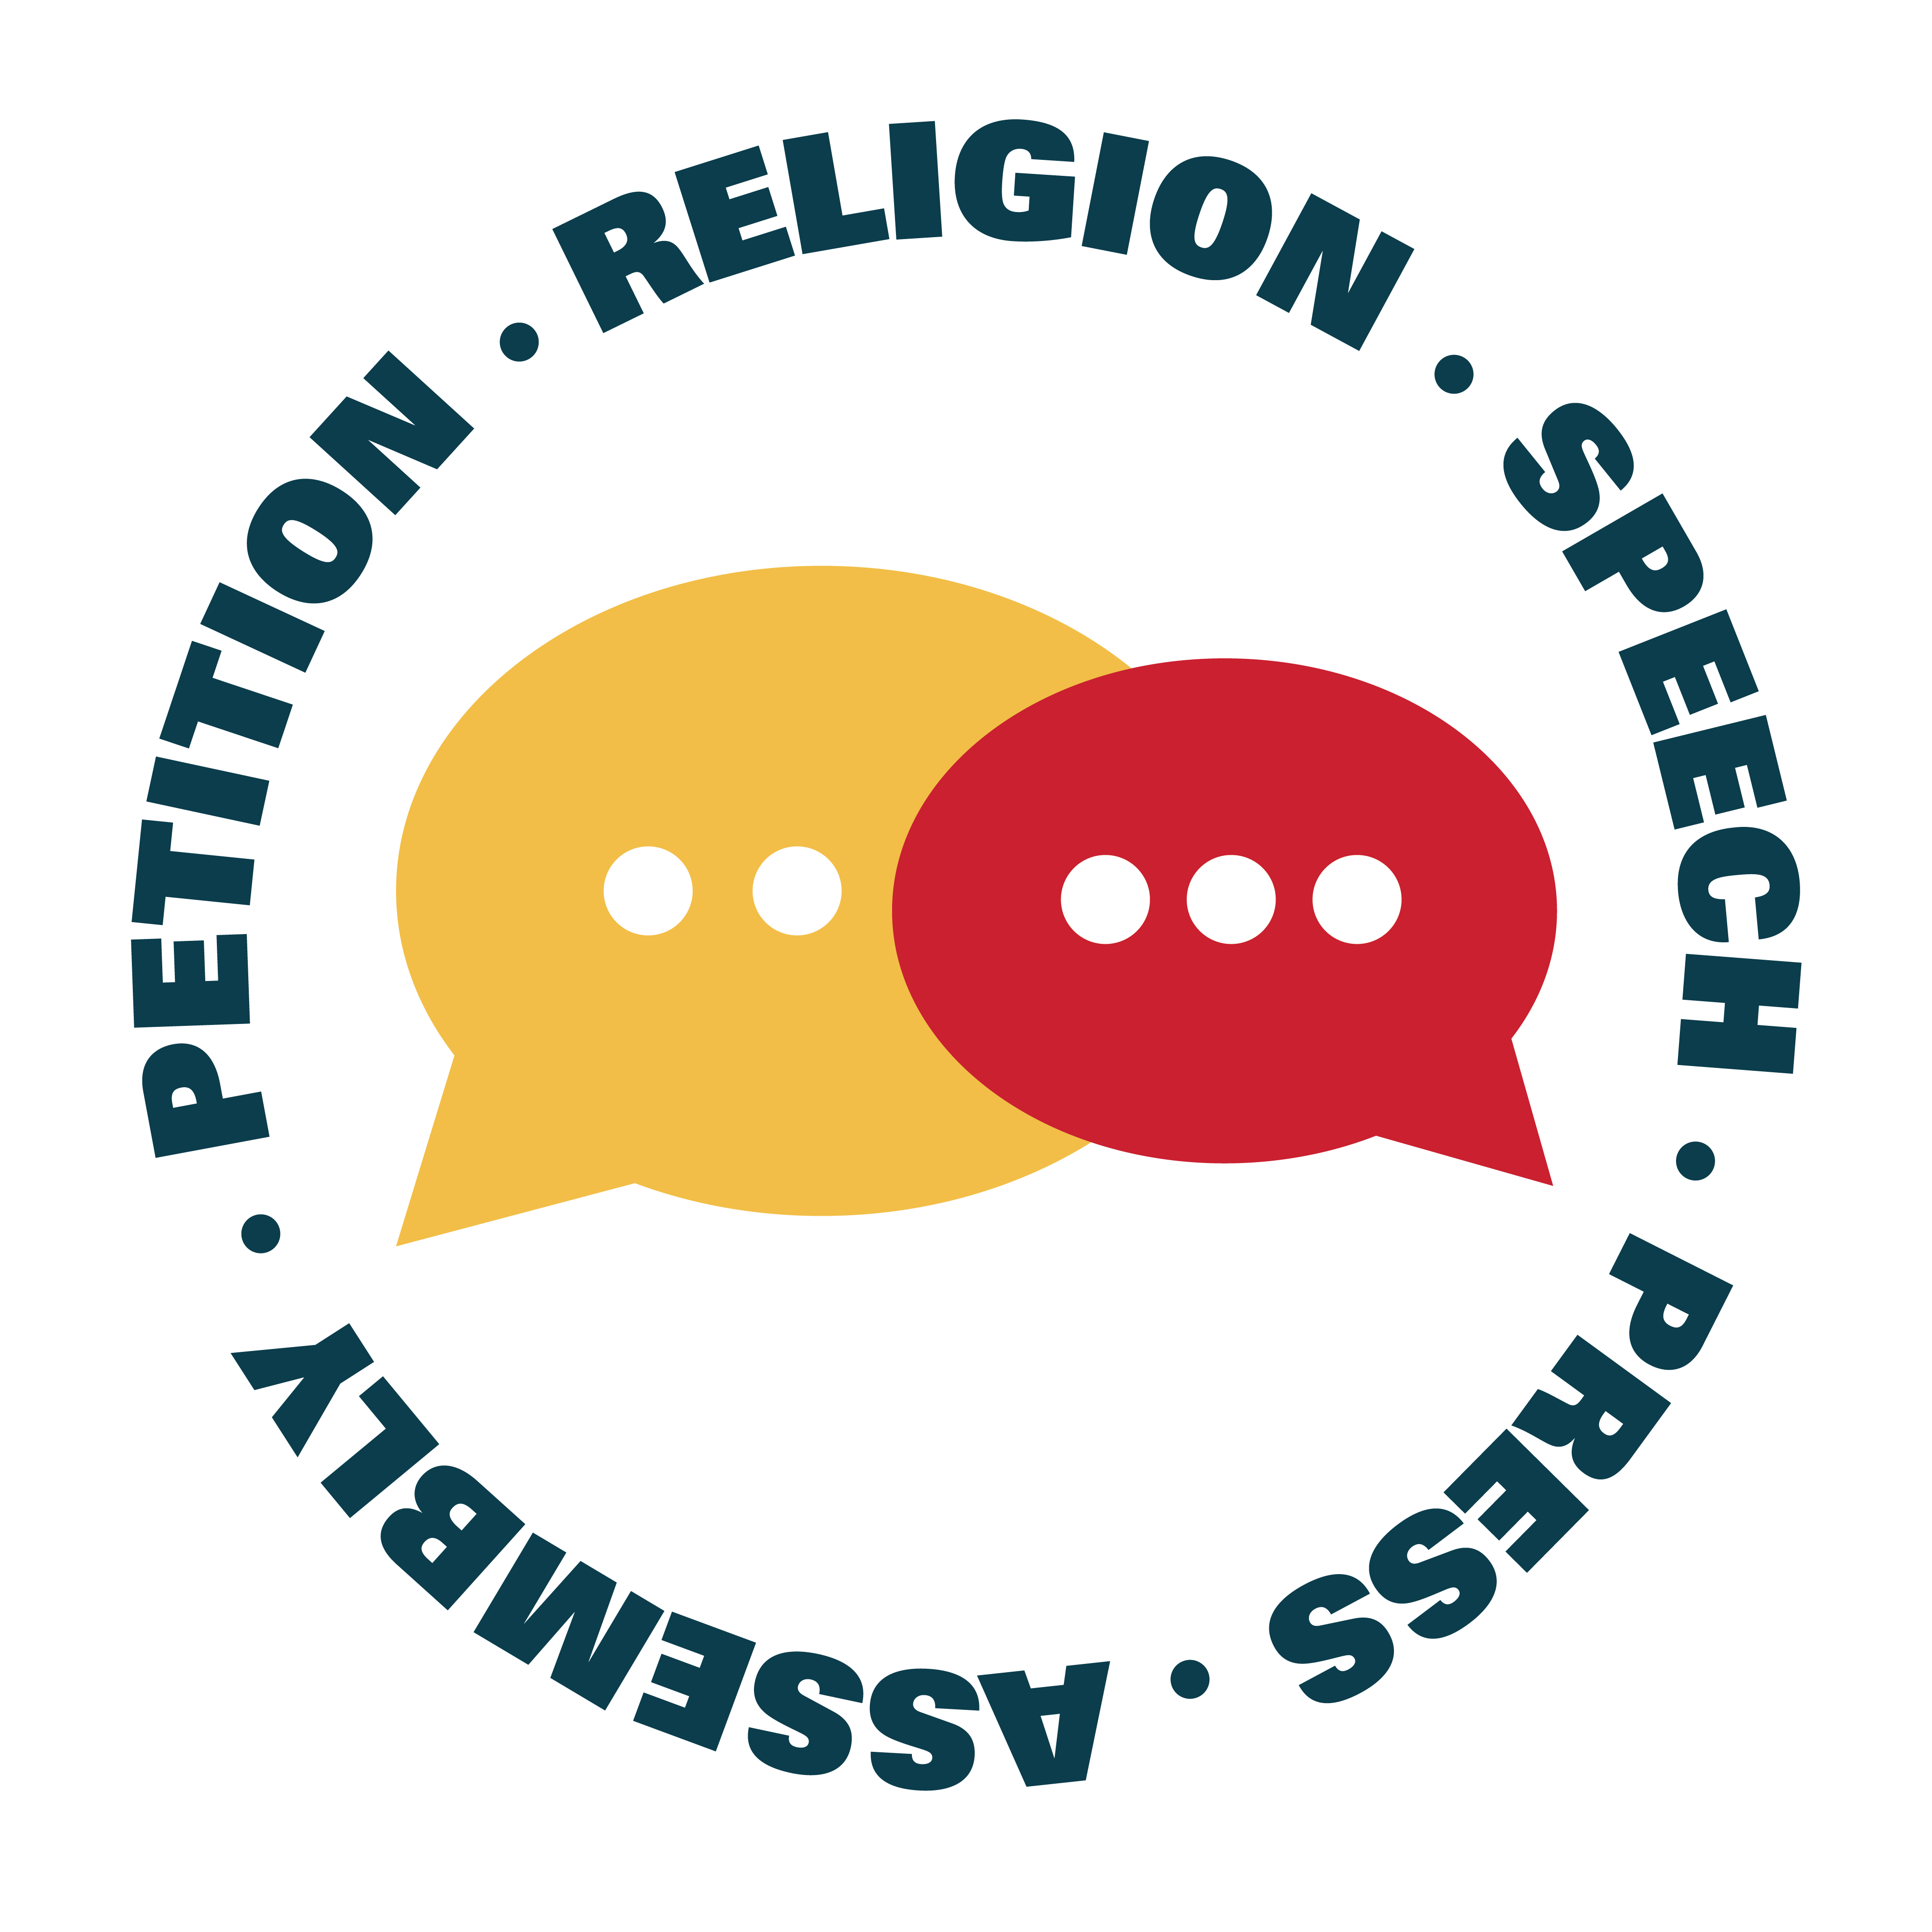 Graphic of red and yellow speech bubbles surrounded by the words: "Religion - Speech - Press - Assembly - Petition"